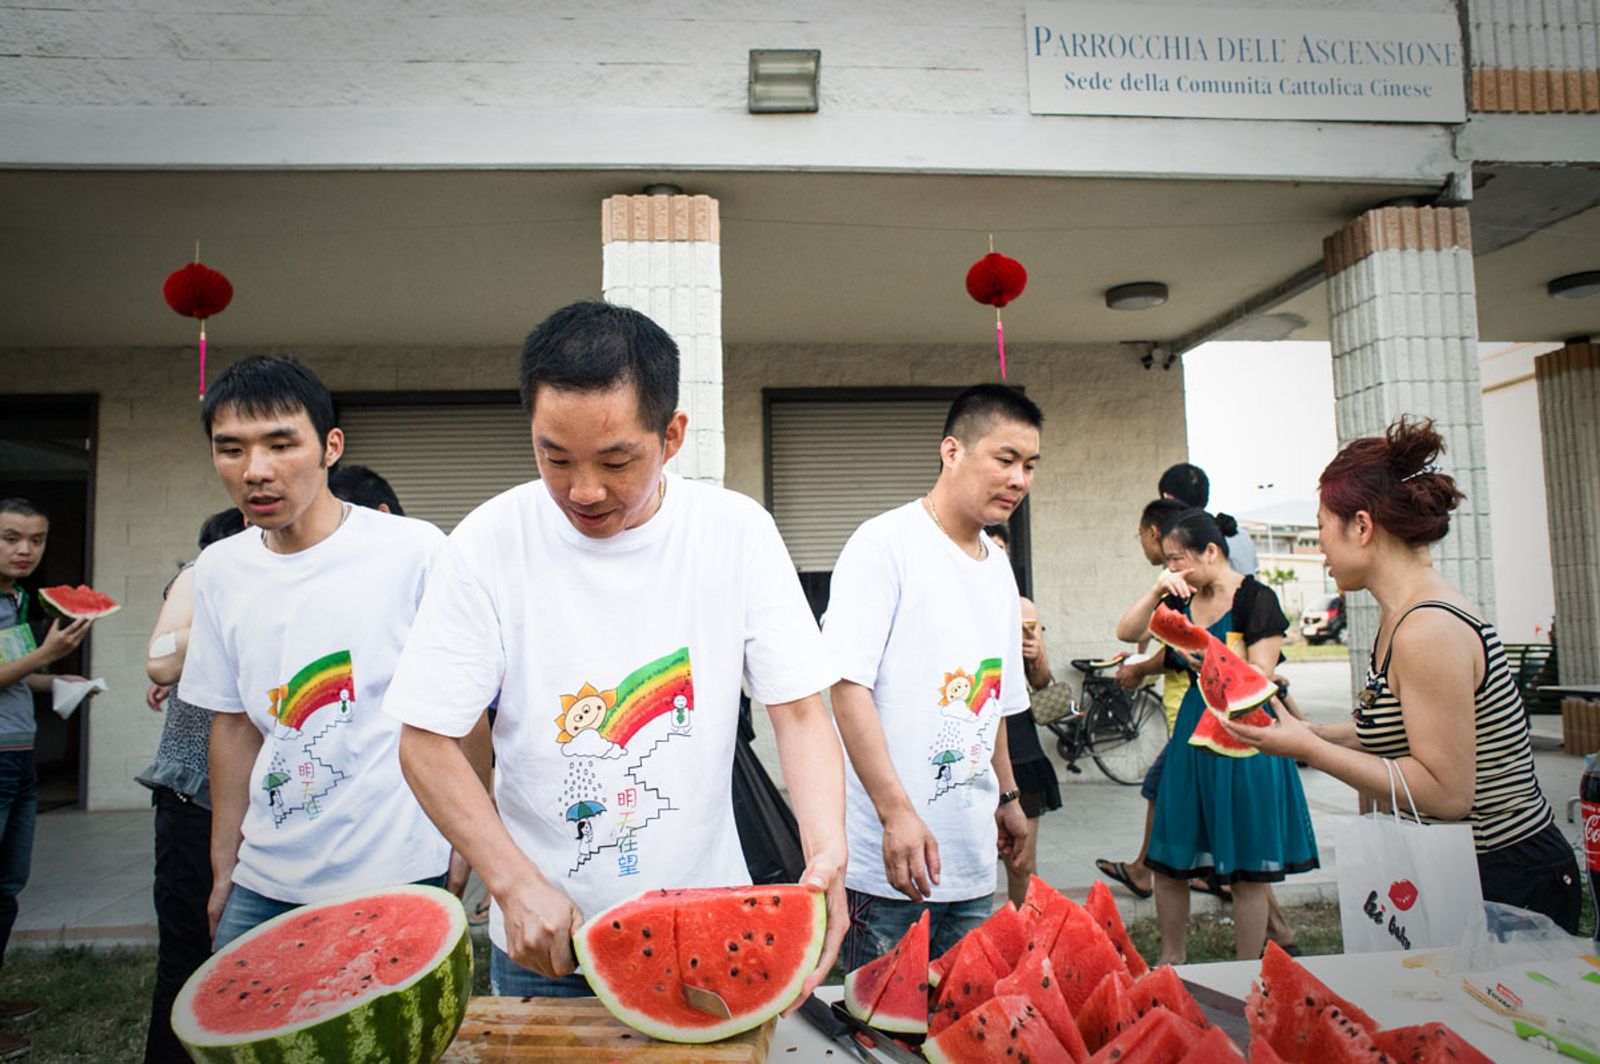 © Agnese Morganti - Prato, Members of the Chinese Roman Catholic community gather for a party at the local church.